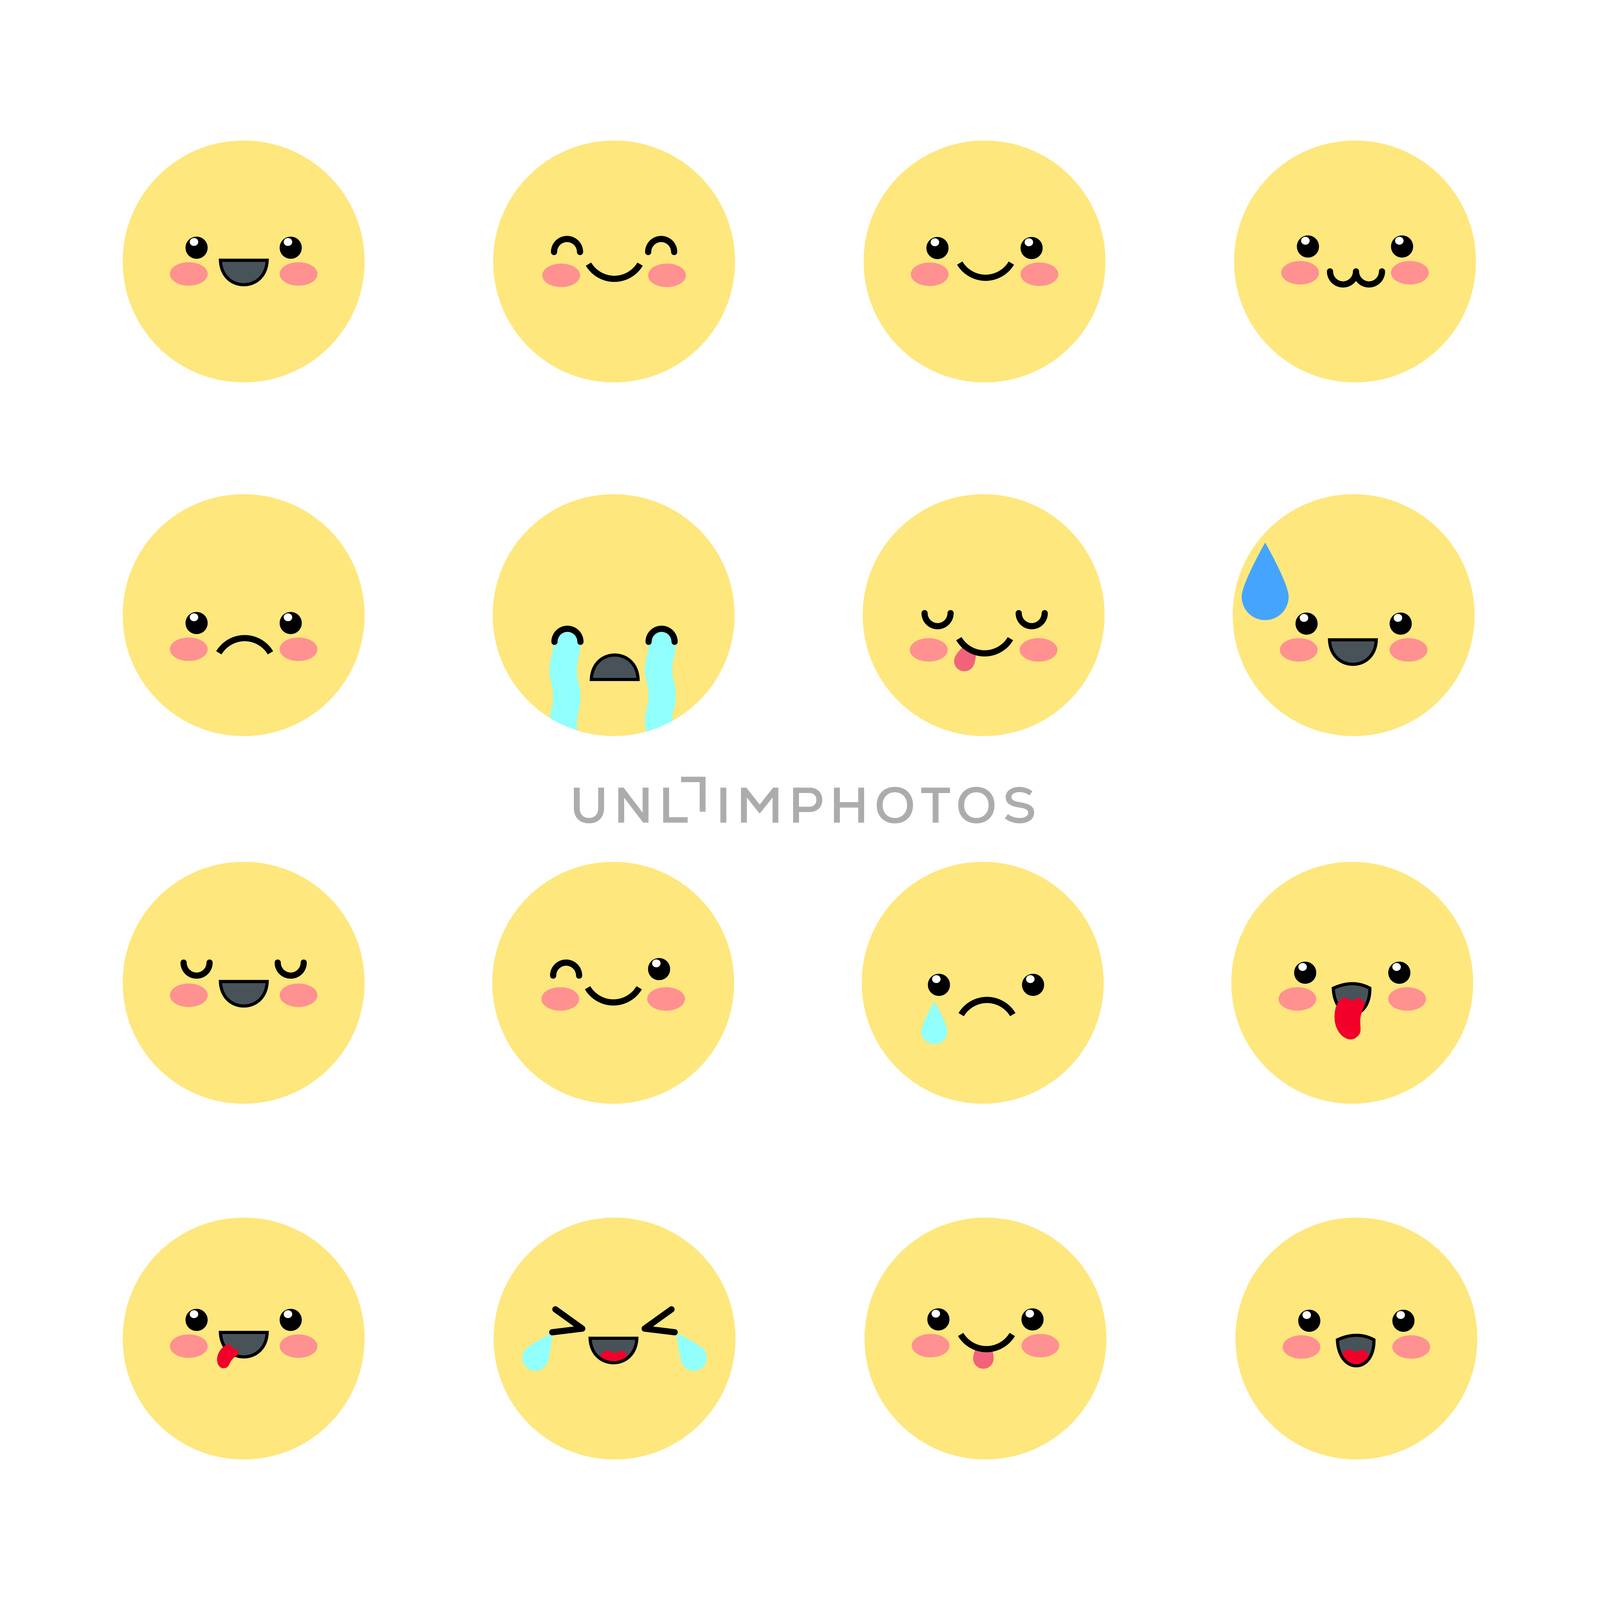 Set emoticons icons for applications and chat. Emoticons with different emotions isolated on white background. Large collection of smiles. Kawaii style.